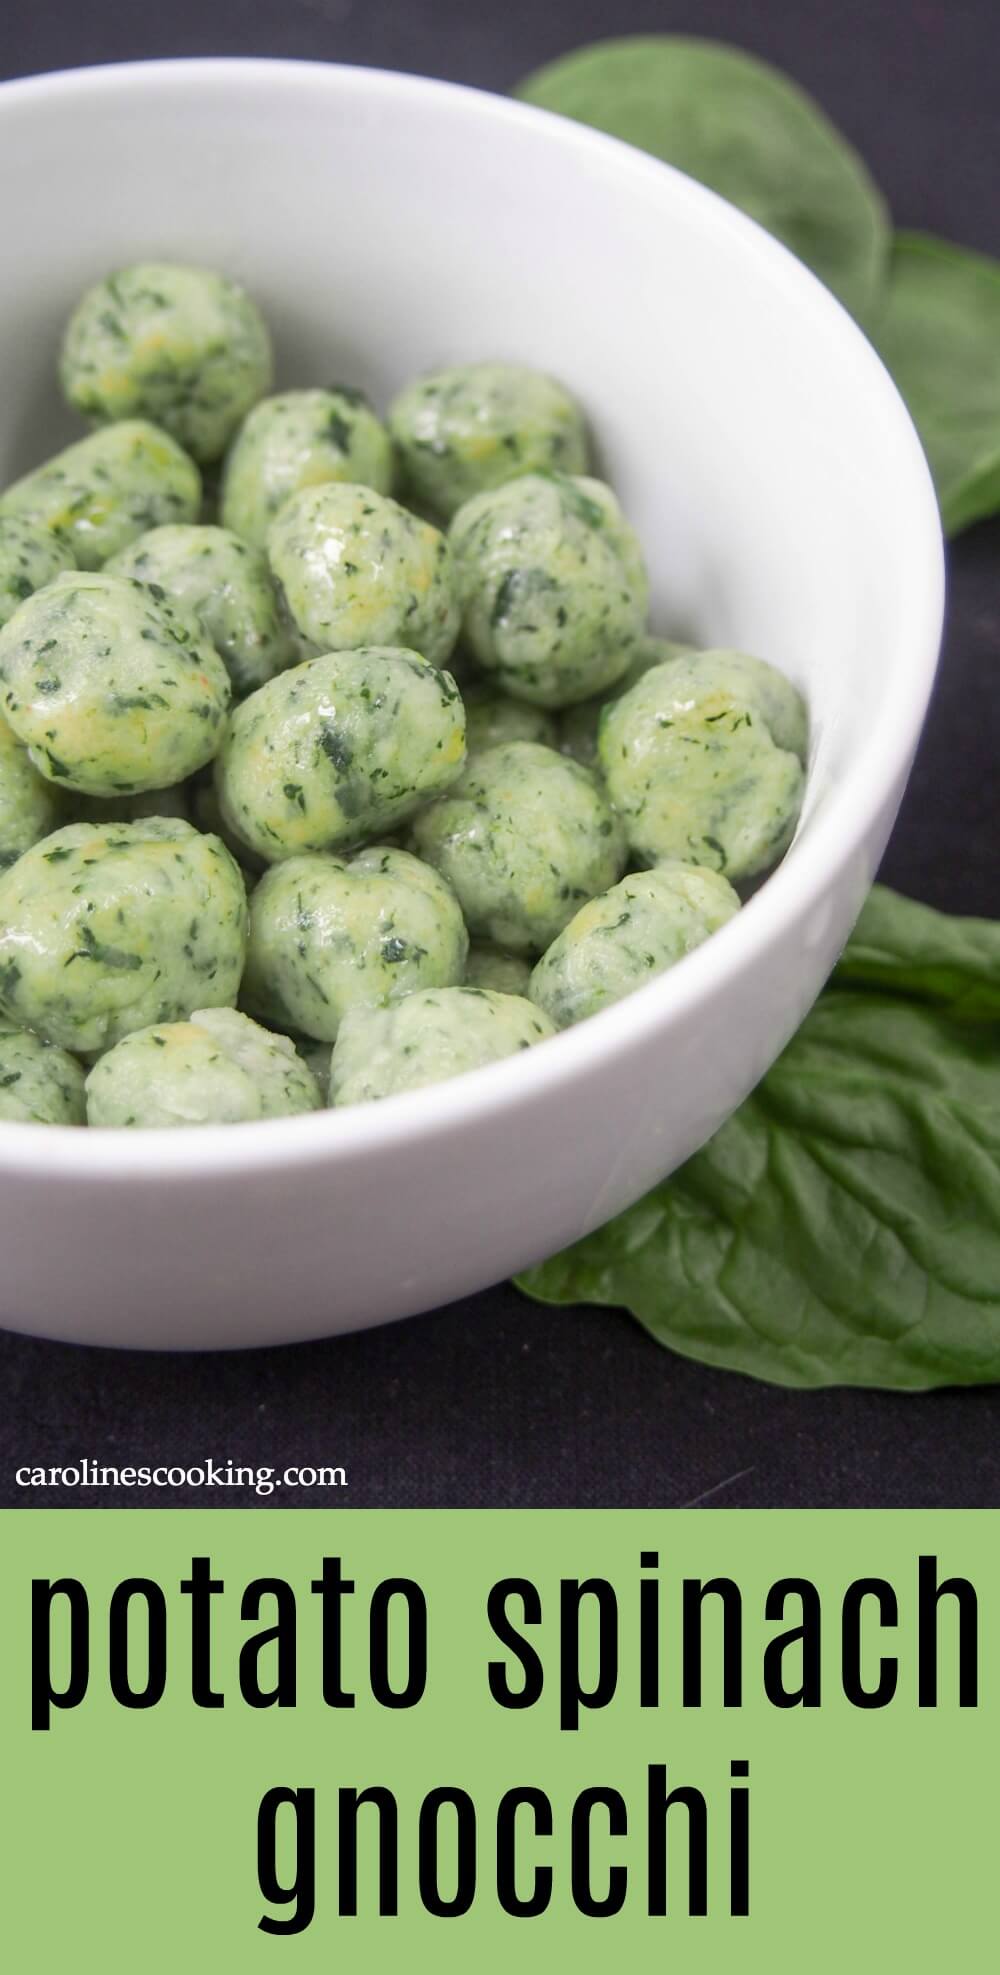 These homemade potato spinach gnocchi are deliciously comforting, light and tasty.  A great way to hide greens for dinner, you'll be too busy enjoying them to notice.  #gnocchi #homemadepasta #vegetarian 